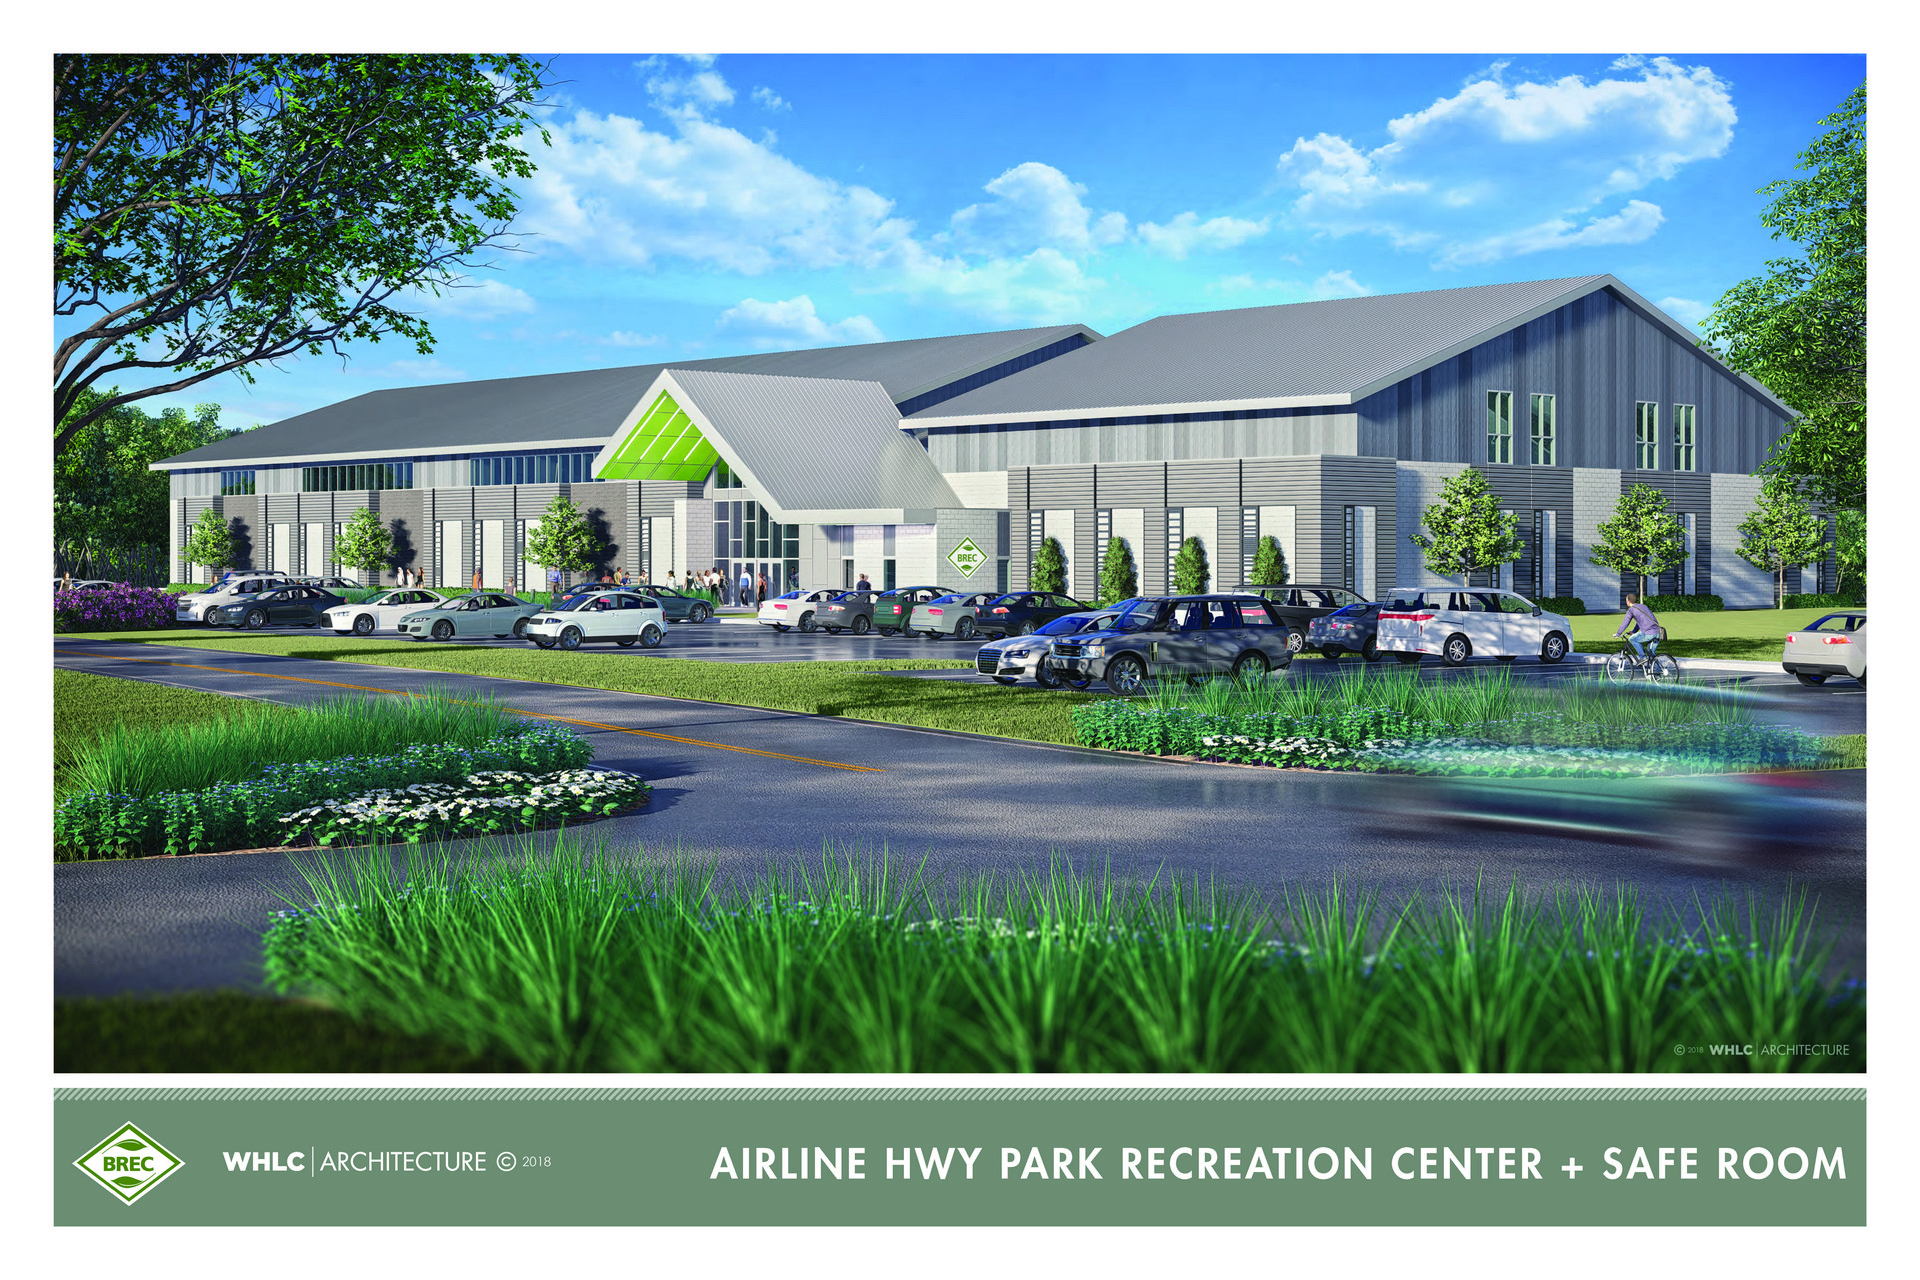 rendering of new recreation center at Airline Highway Park